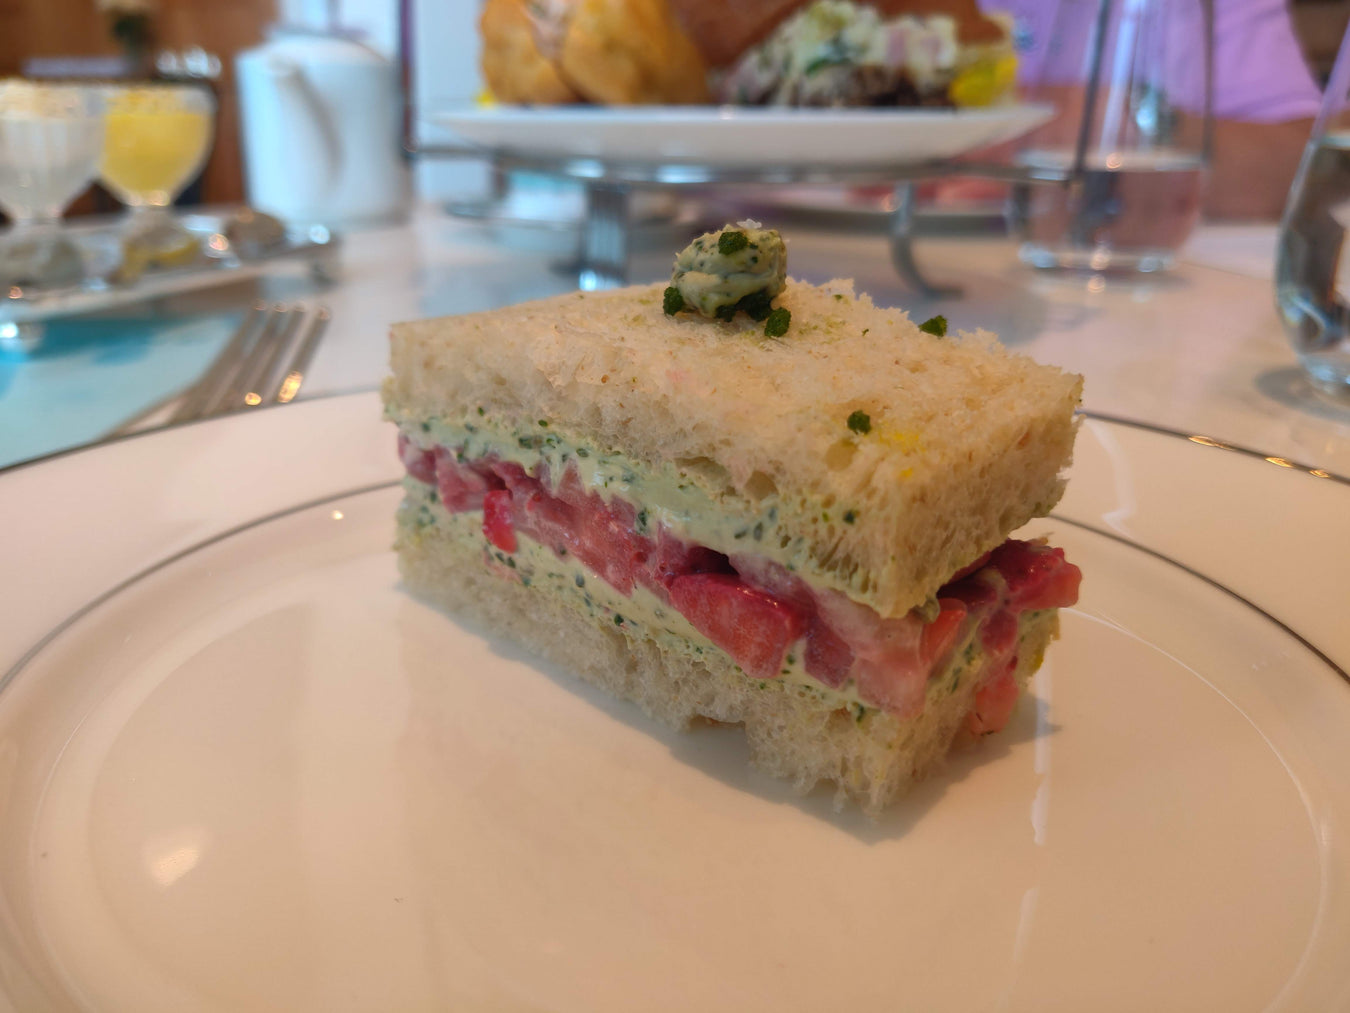 TeaLula in Park Ridge offers a lovely Afternoon Tea experience in the Chicago suburbs including exquisite premium loose leaf tea and seasonal tea sandwiches, scones, and sweets.